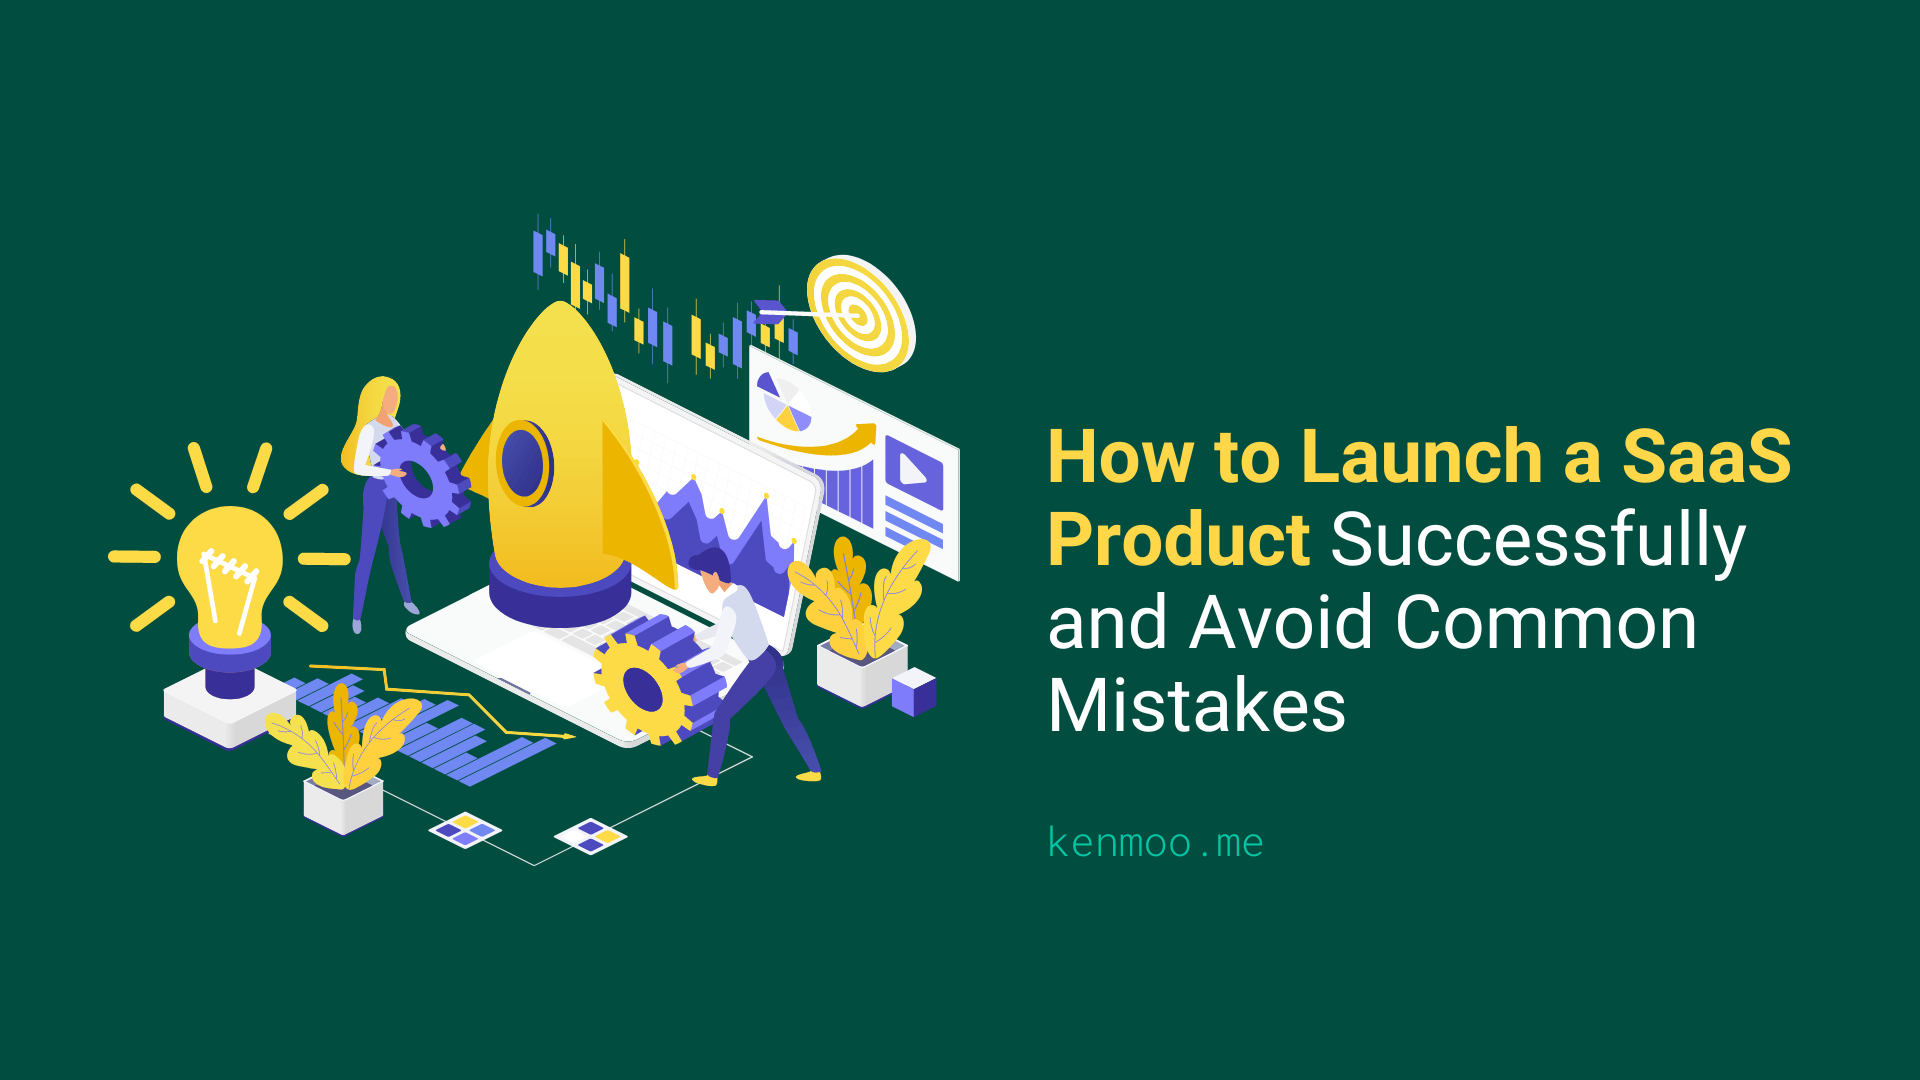 How to Launch a SaaS Product Successfully and Avoid Common Mistakes